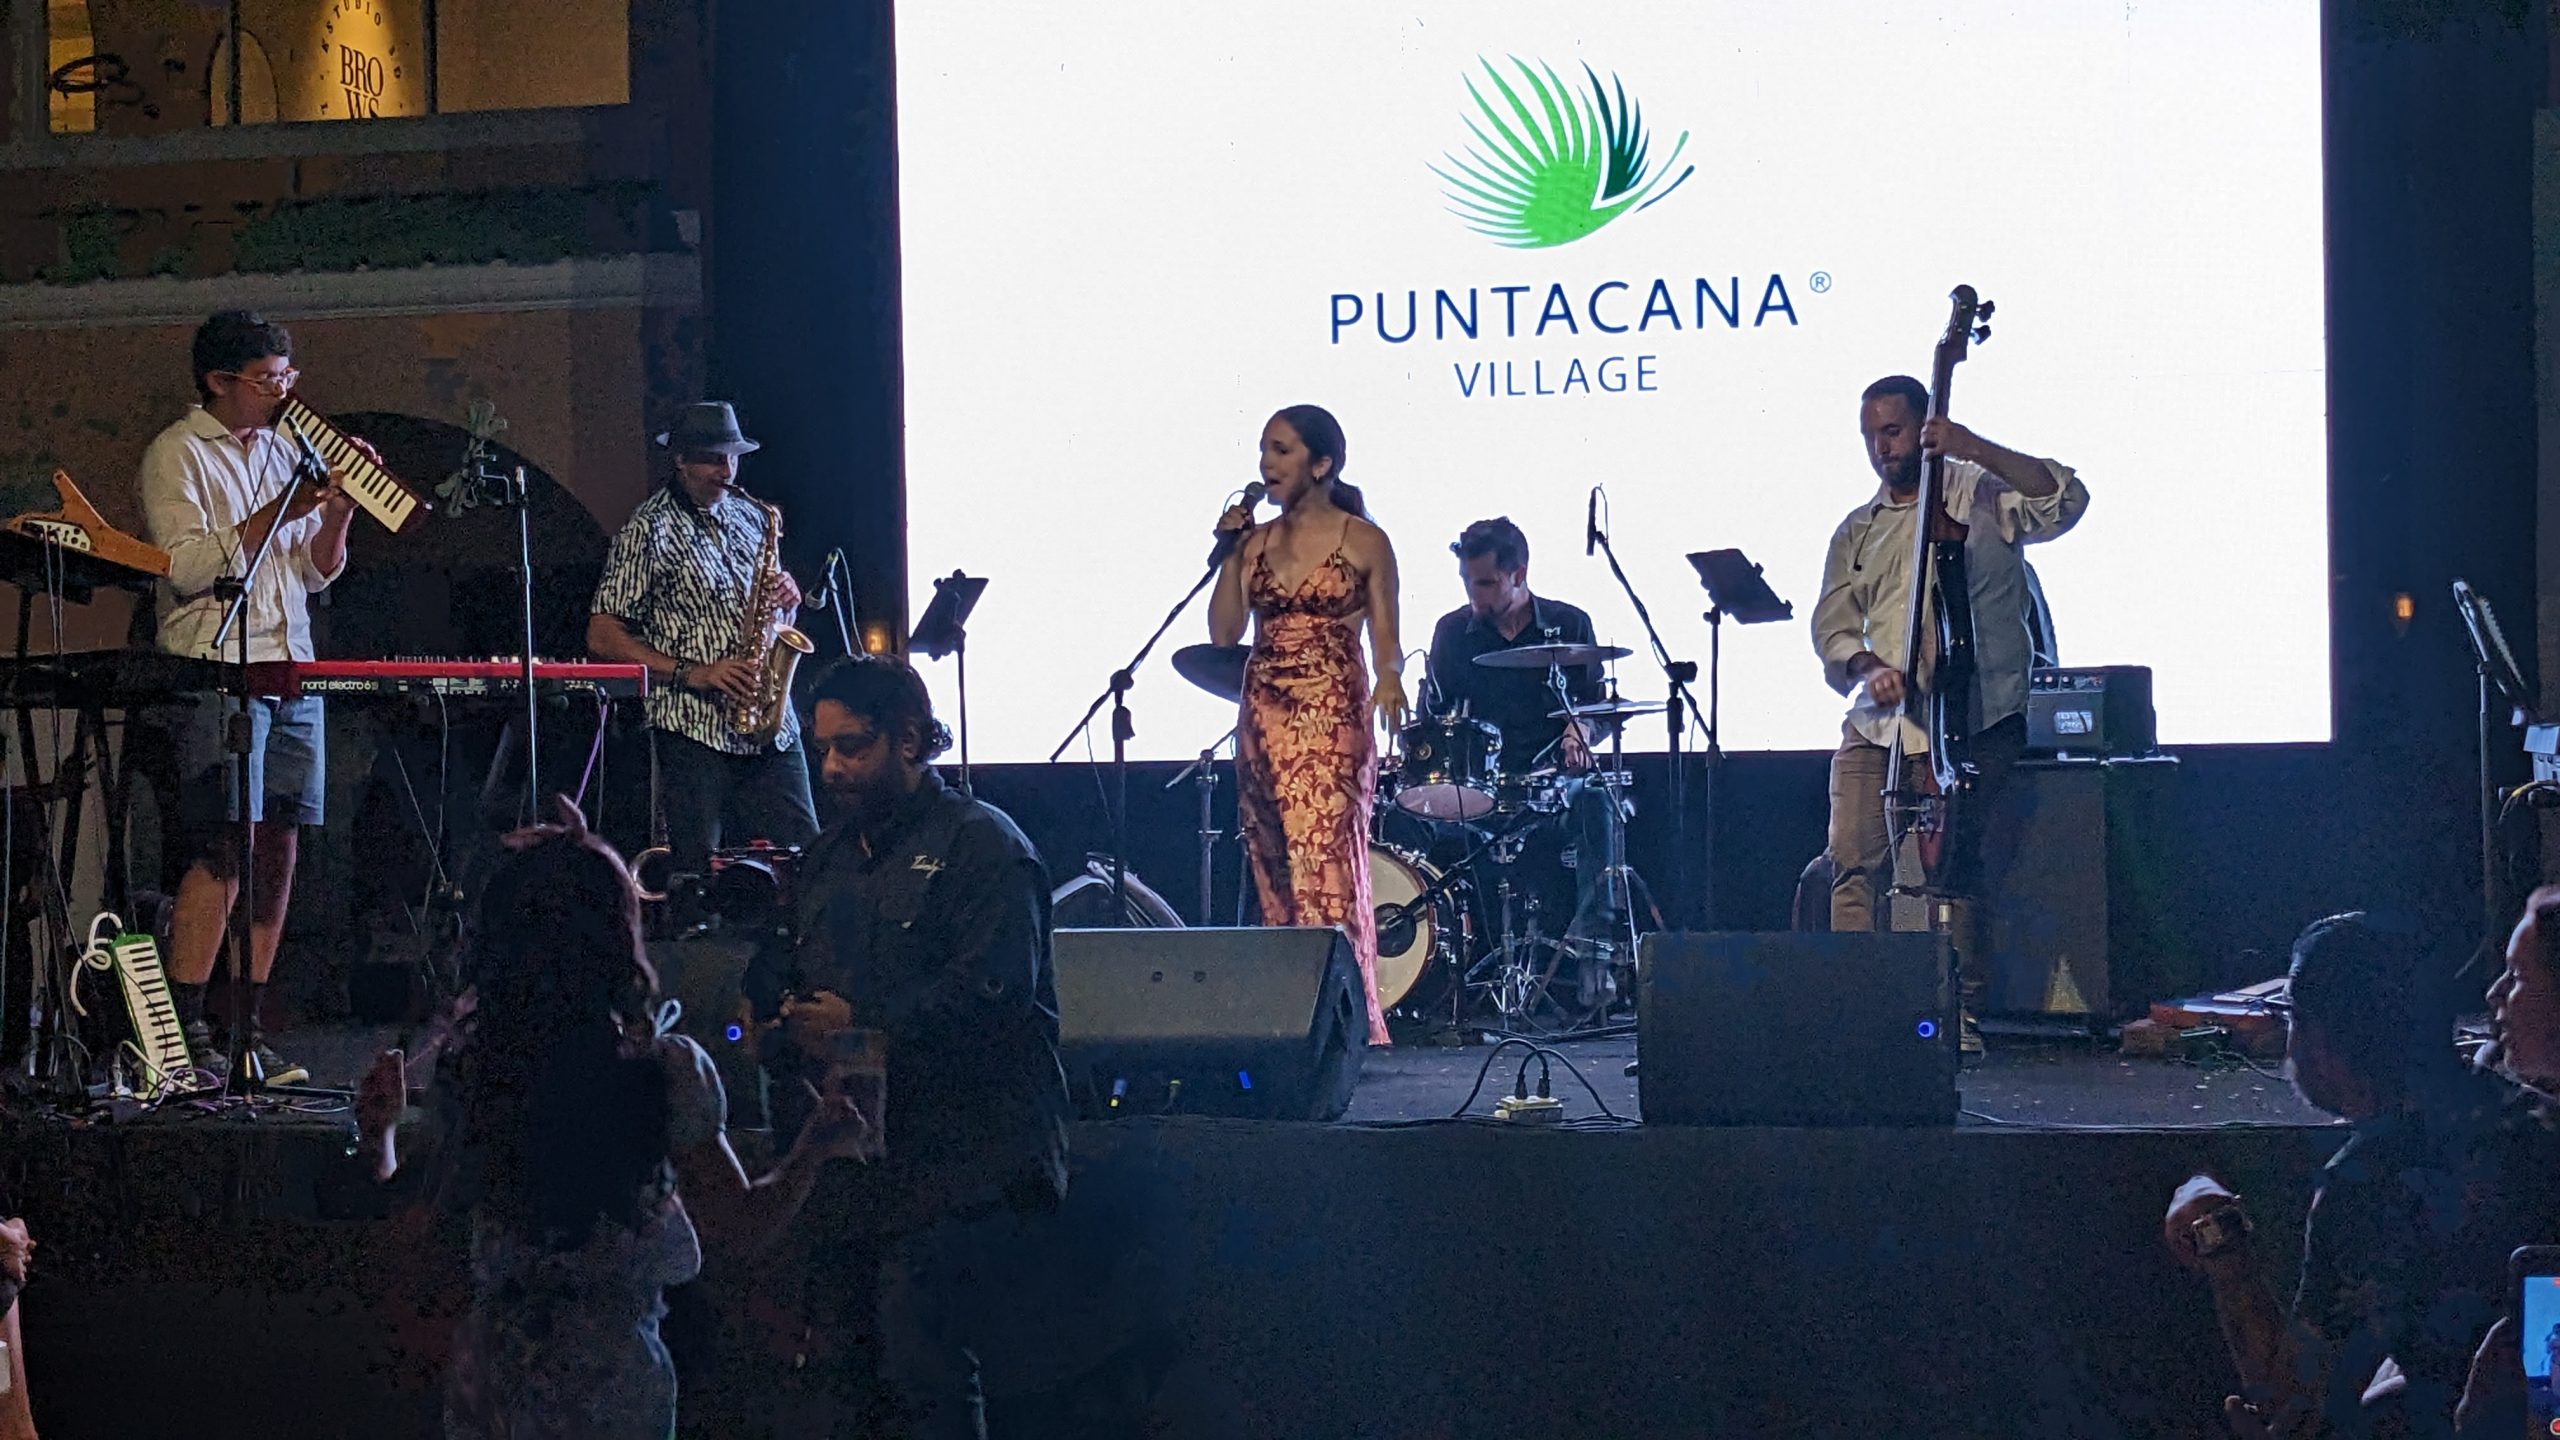 First Jazz Fest held at Punta Cana Village